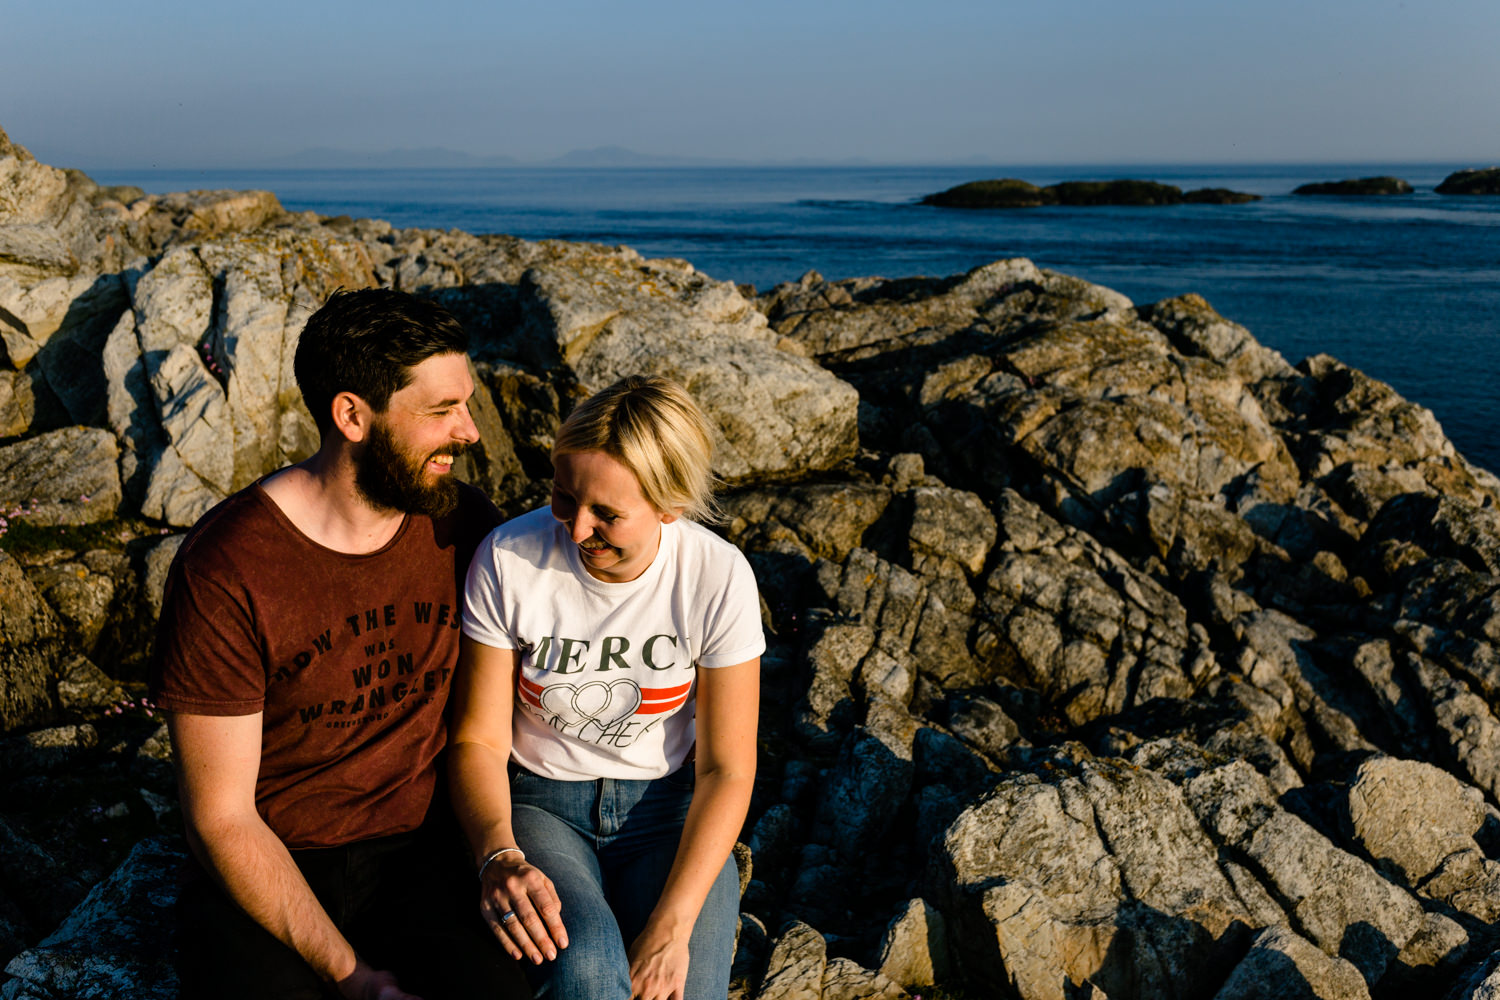 Anglesey Wedding photographers capture a couple laughing together on the headland rocks.